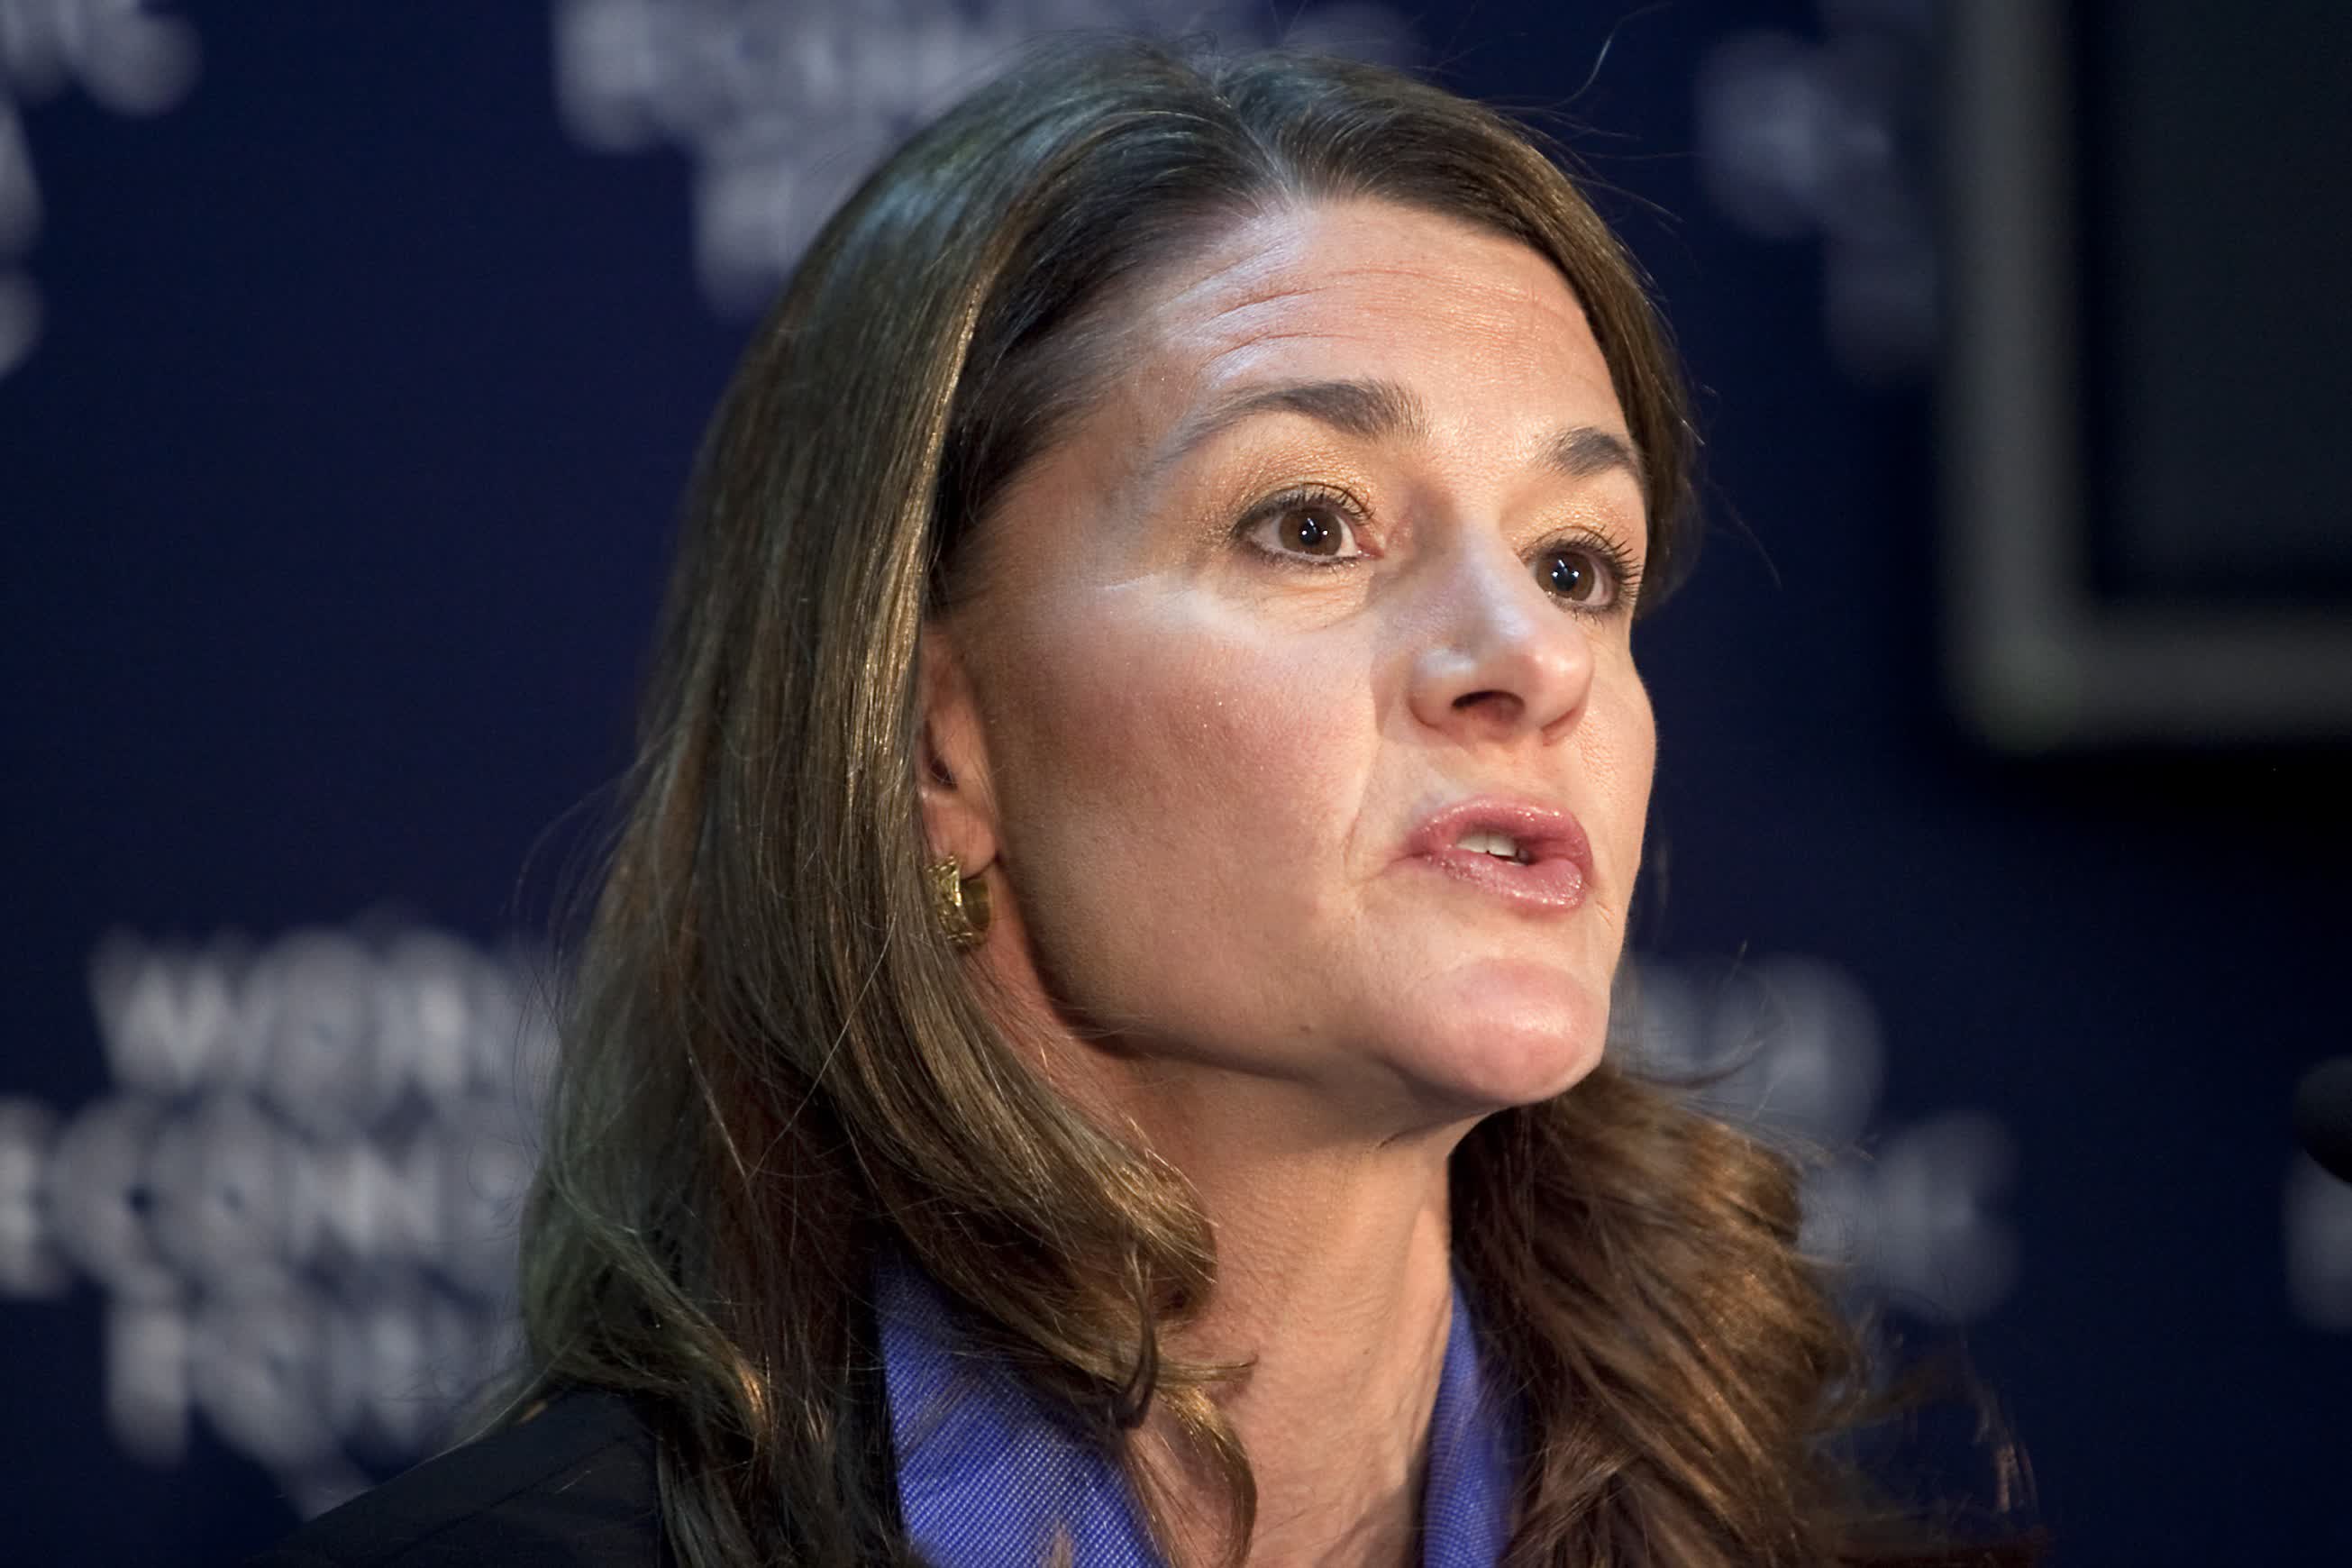 Melinda French Gates will no longer give most of her wealth to the Gates Foundation